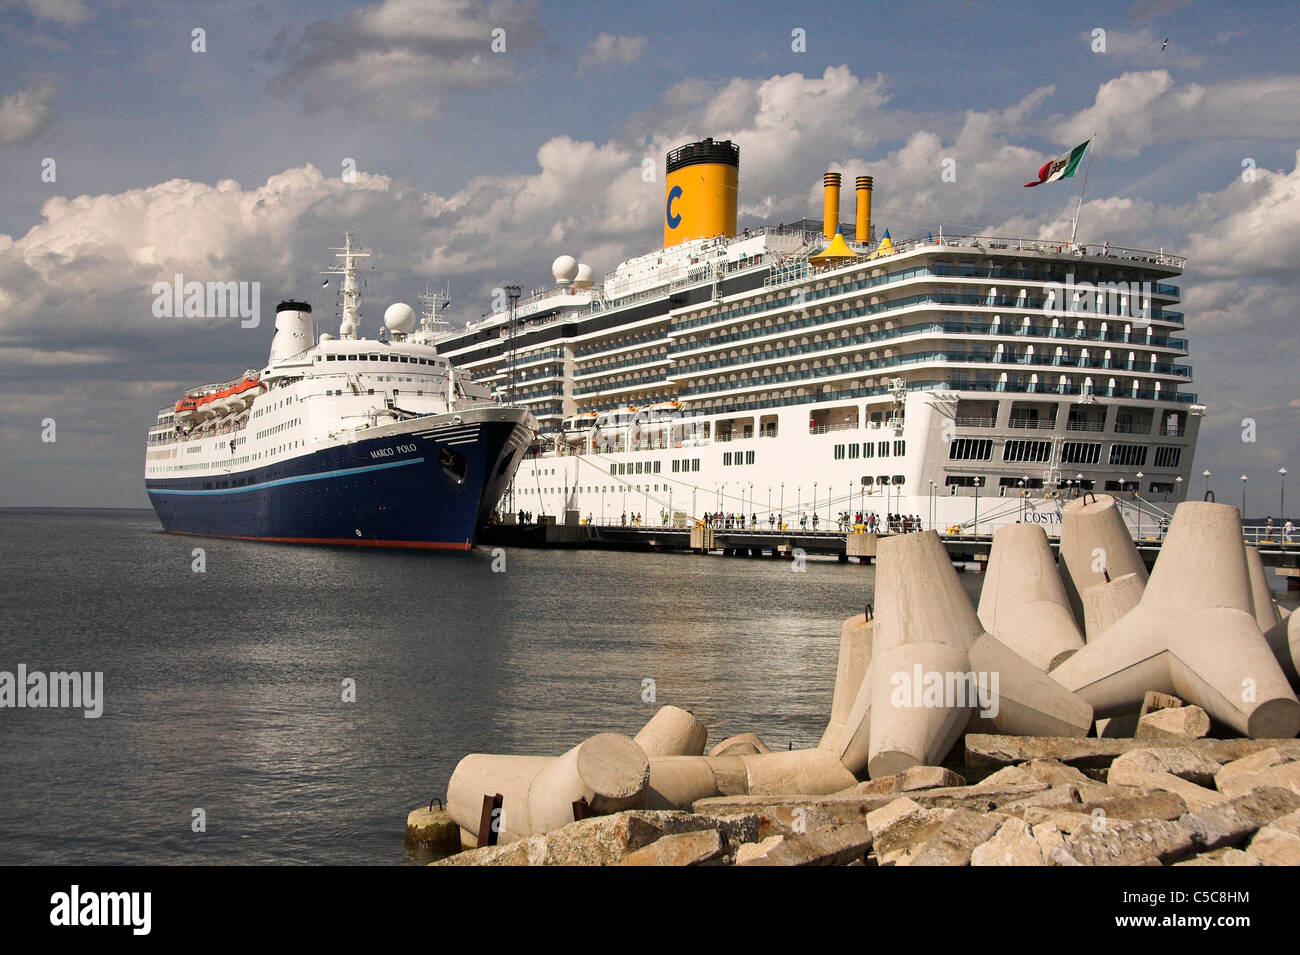 Cruise ships berthed in the Port of Tallinn, Estonia Stock Photo